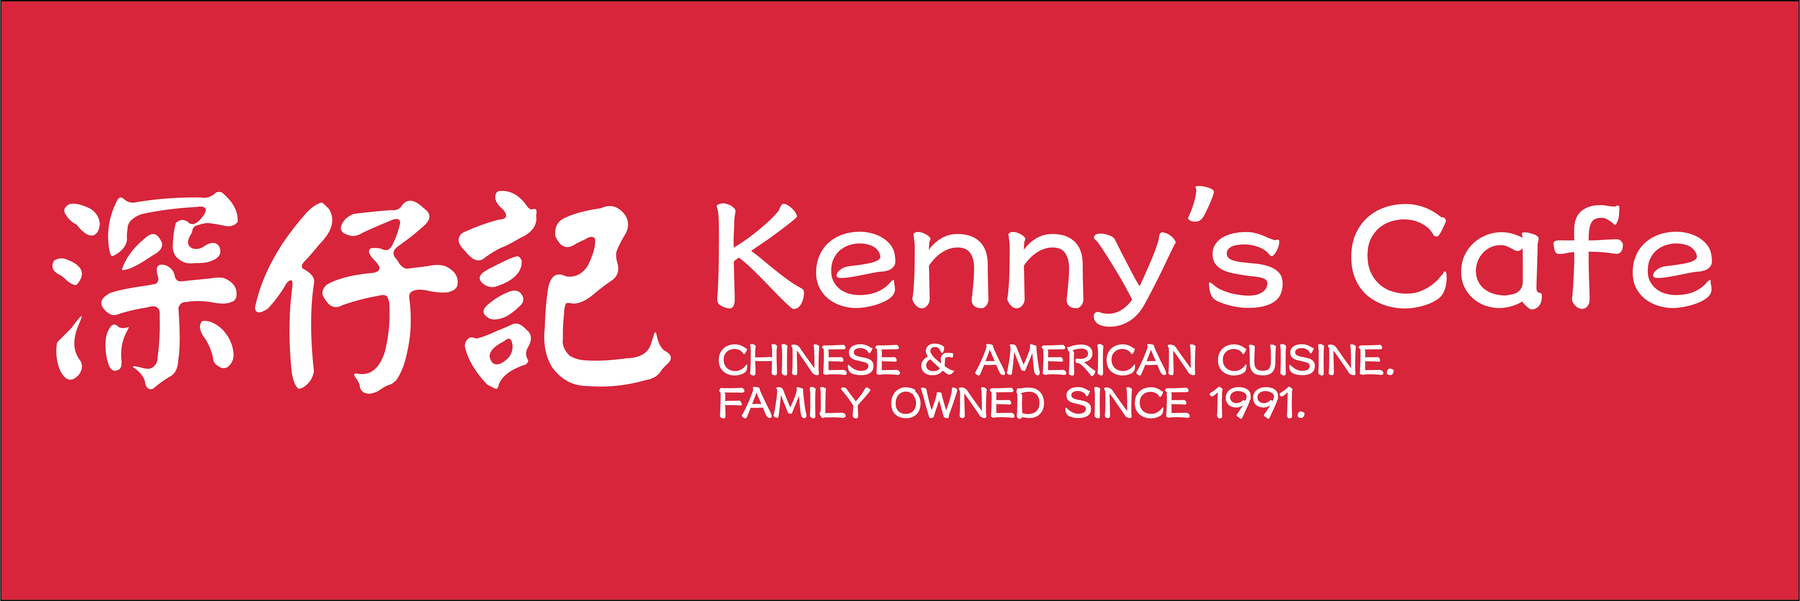 Kenny's Cafe Home